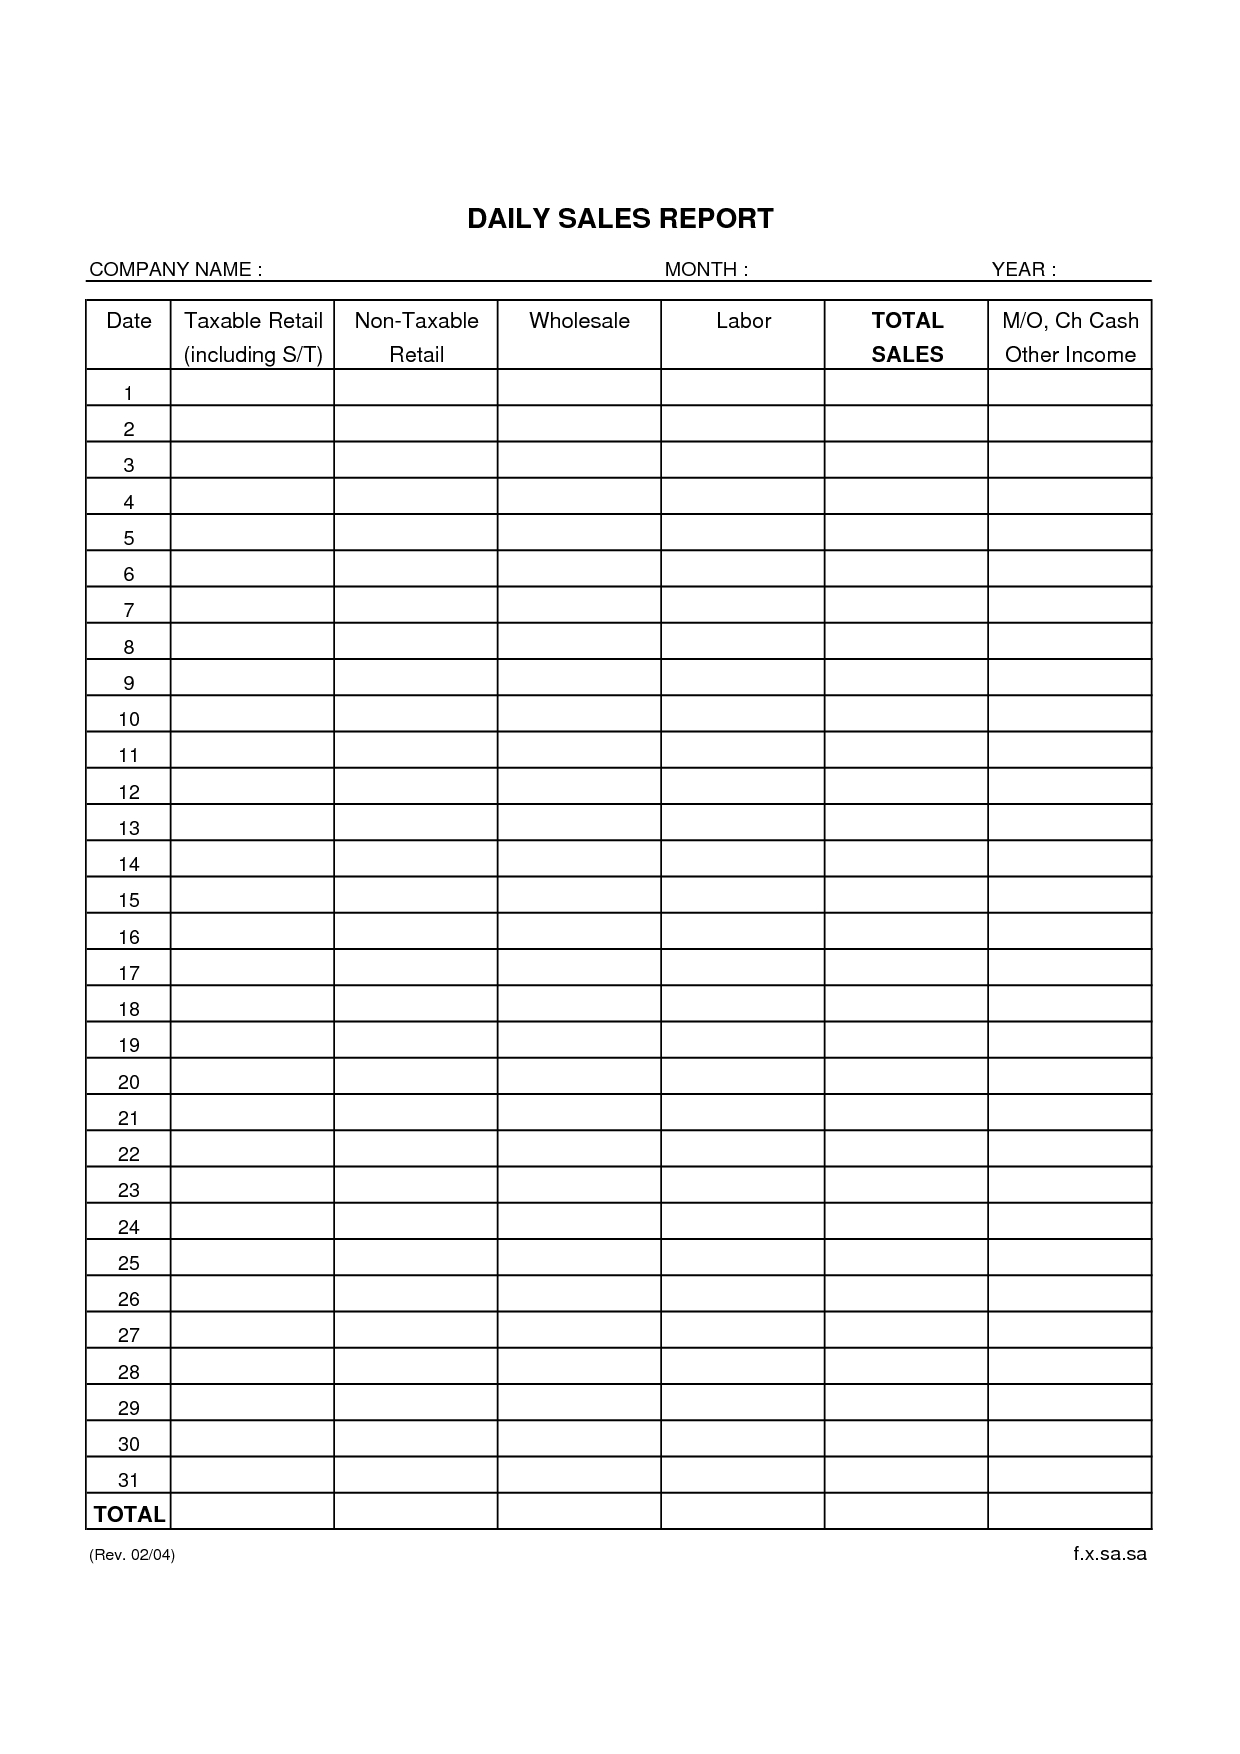 Wonderful Daily Sales Report Template Example : V M D Pertaining To Employee Daily Report Template